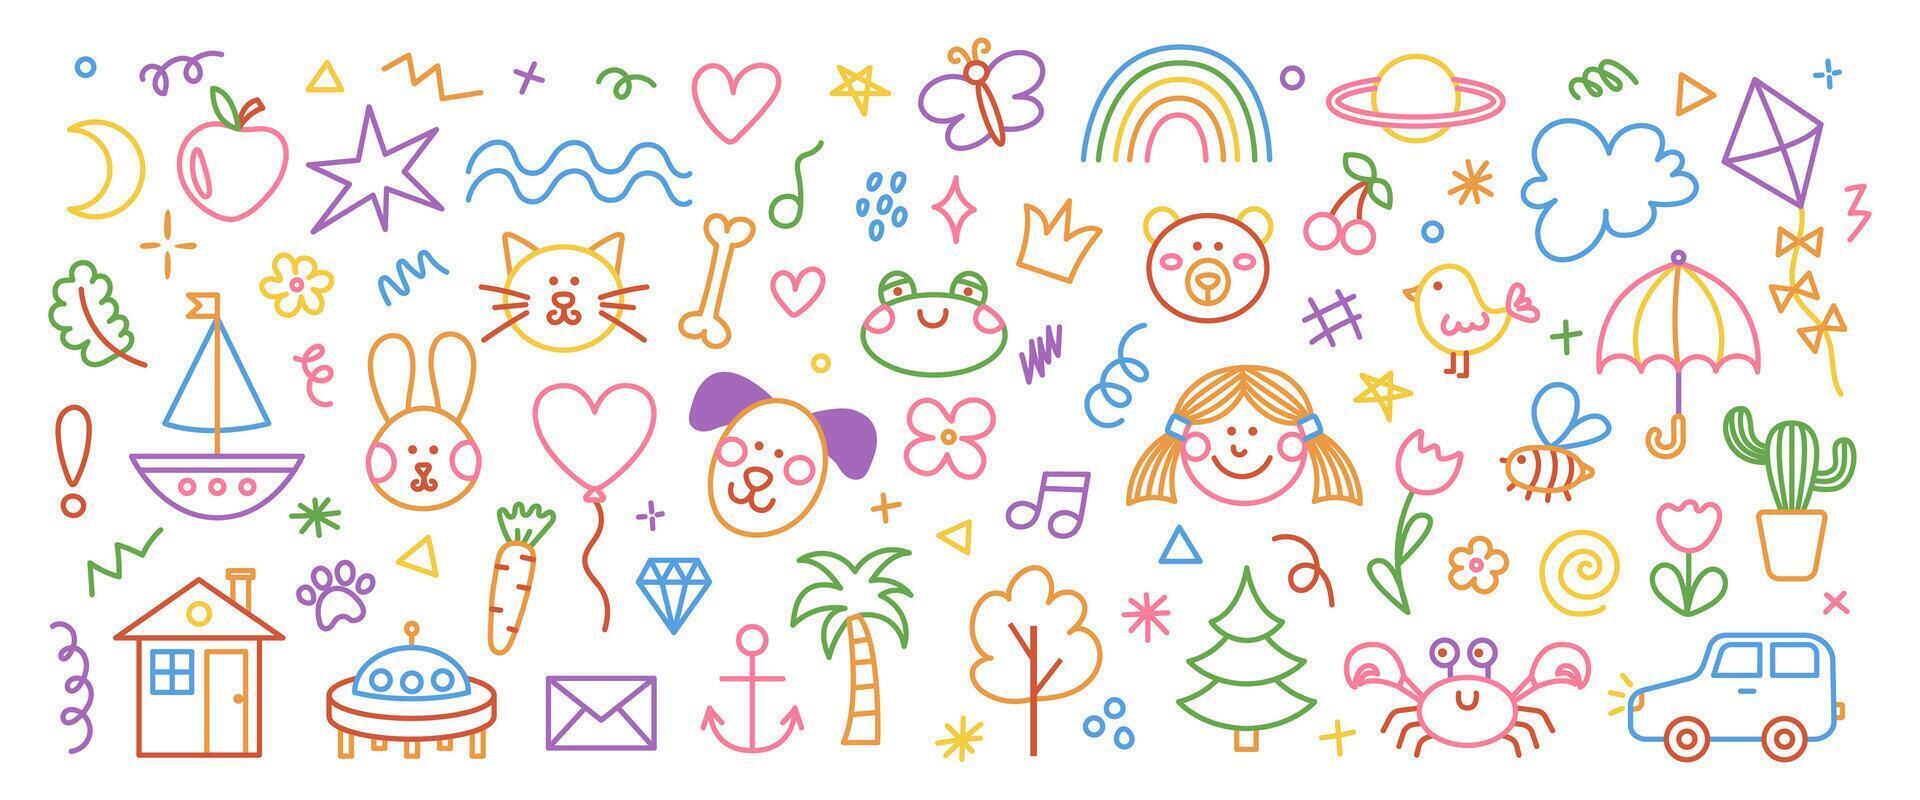 Cute hand drawn doodle set of simple kids decorative elements. Colorful collection of scribble, animal, flower, sun, cloud. Vector illustration